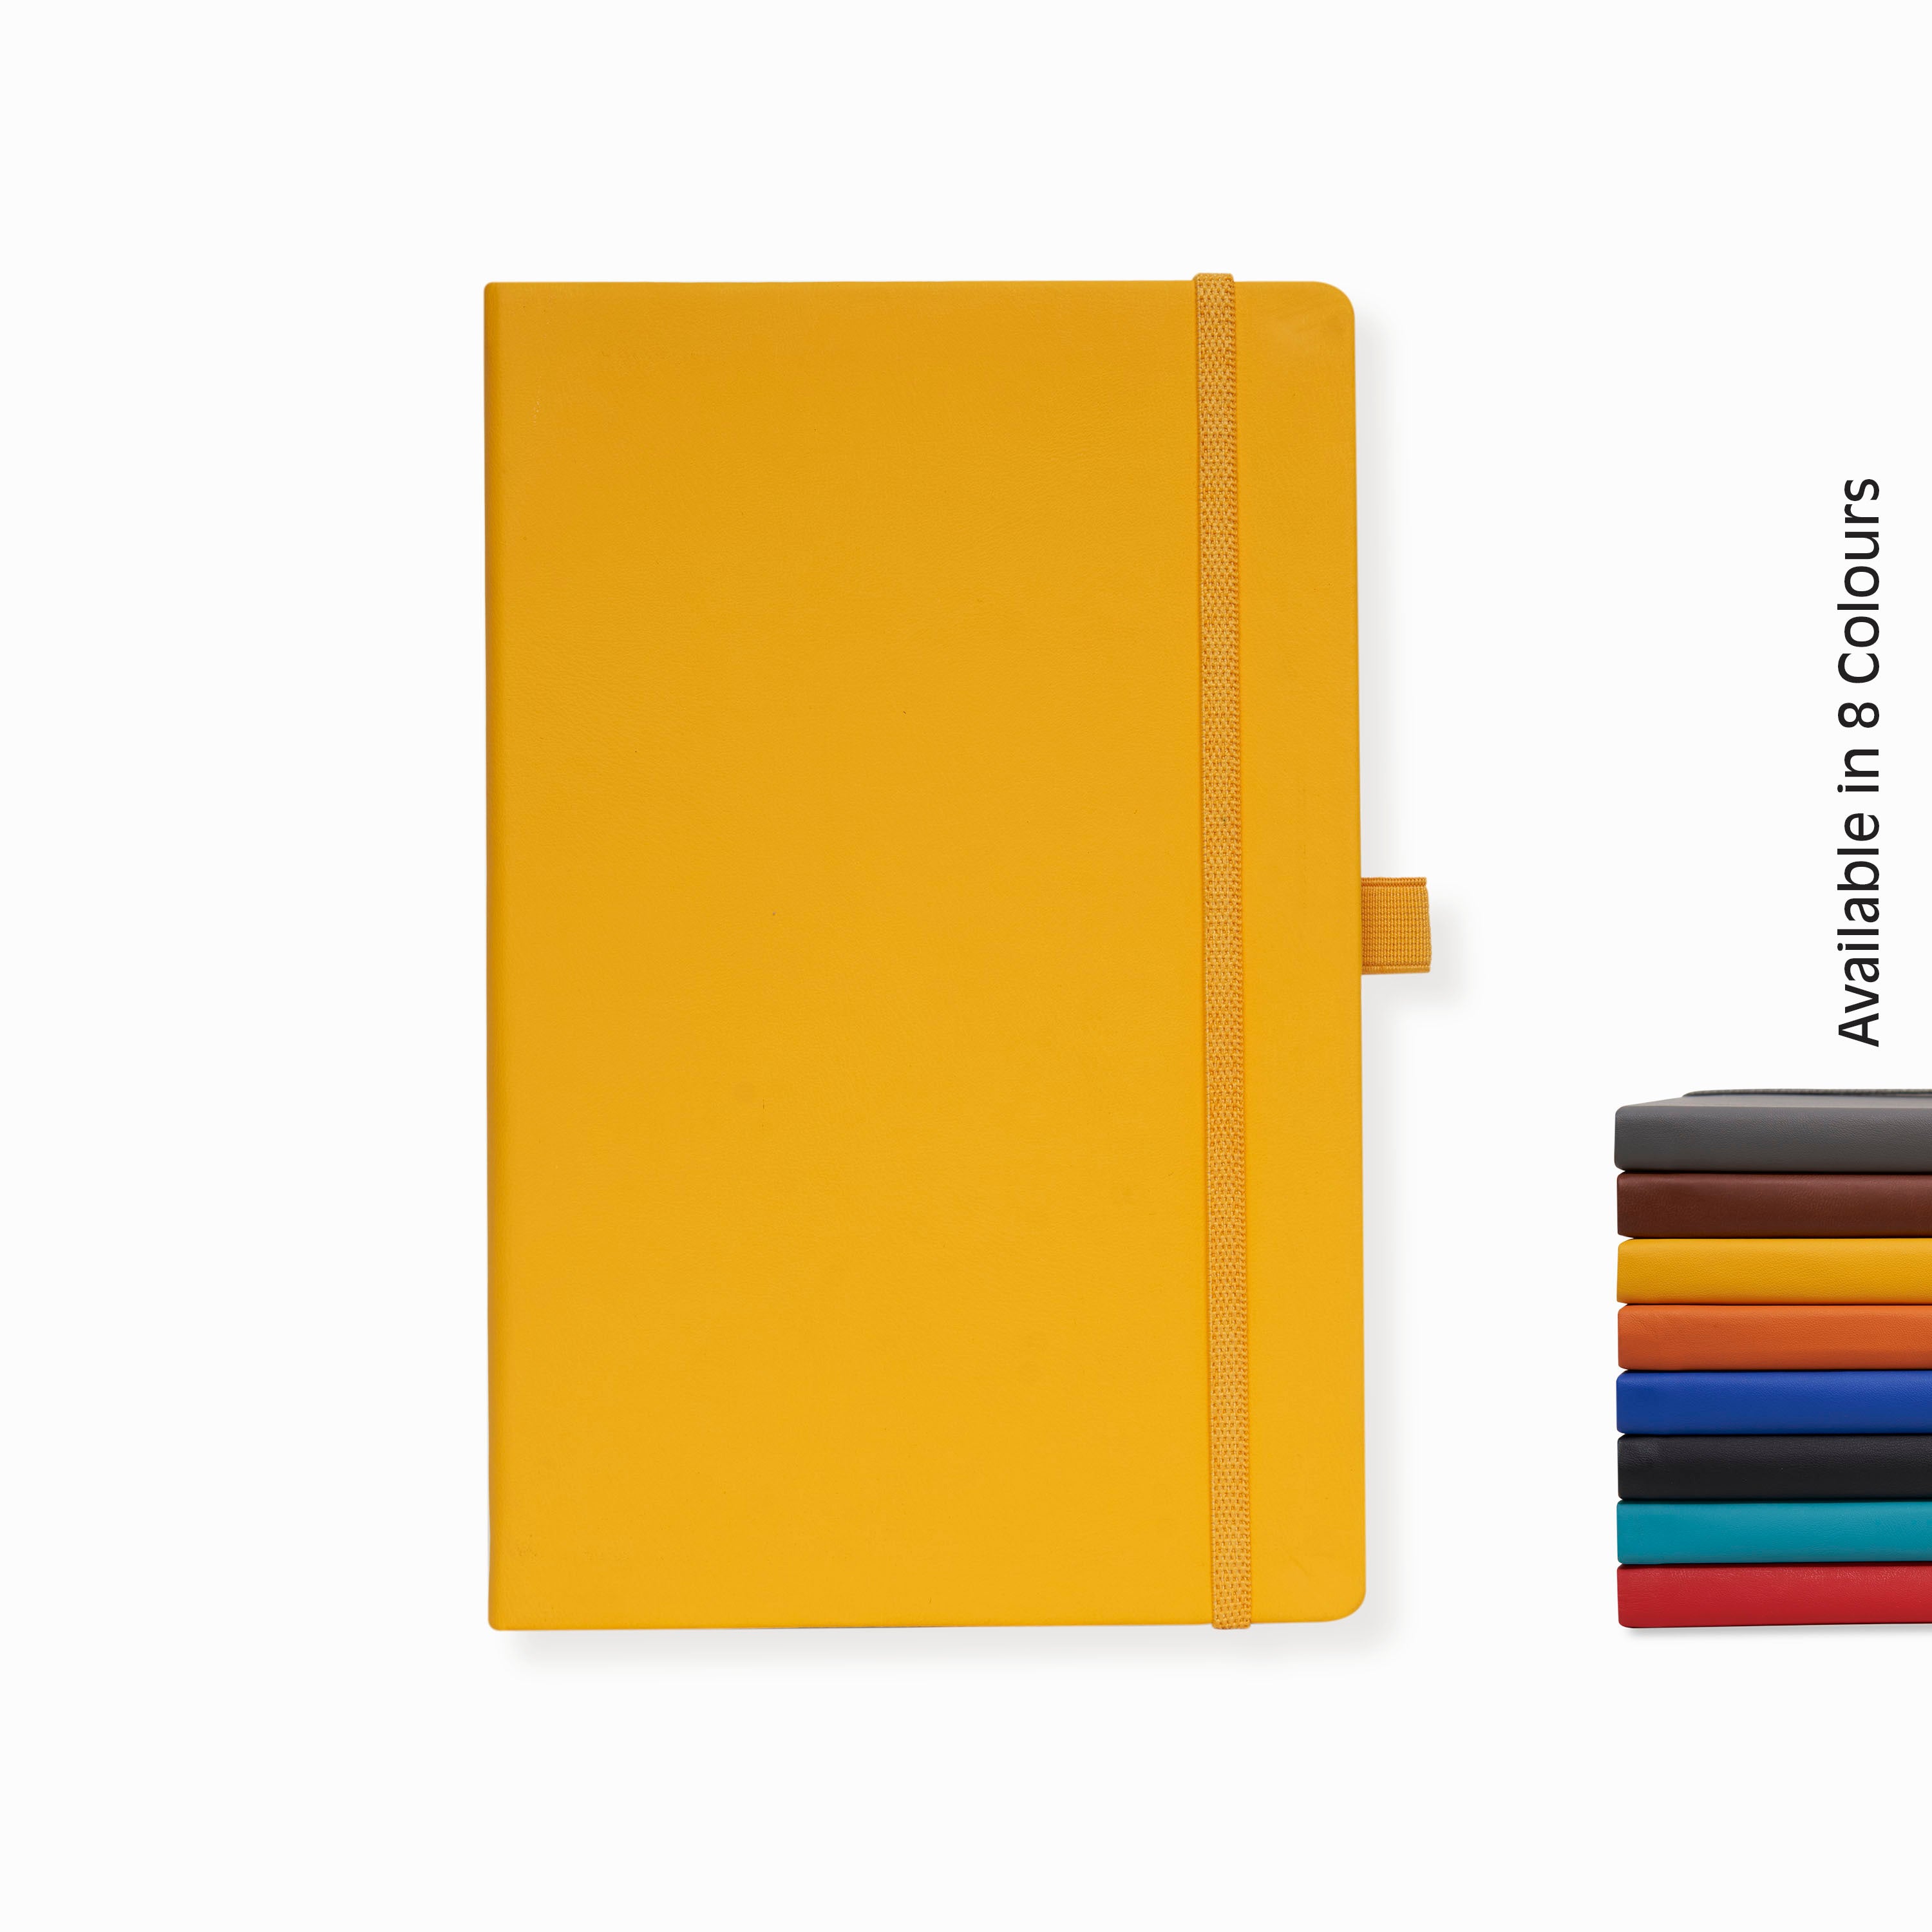 Pro Series Executive A5 PU Leather Hardbound Unruled Diary with Pen Loop - YELLOW